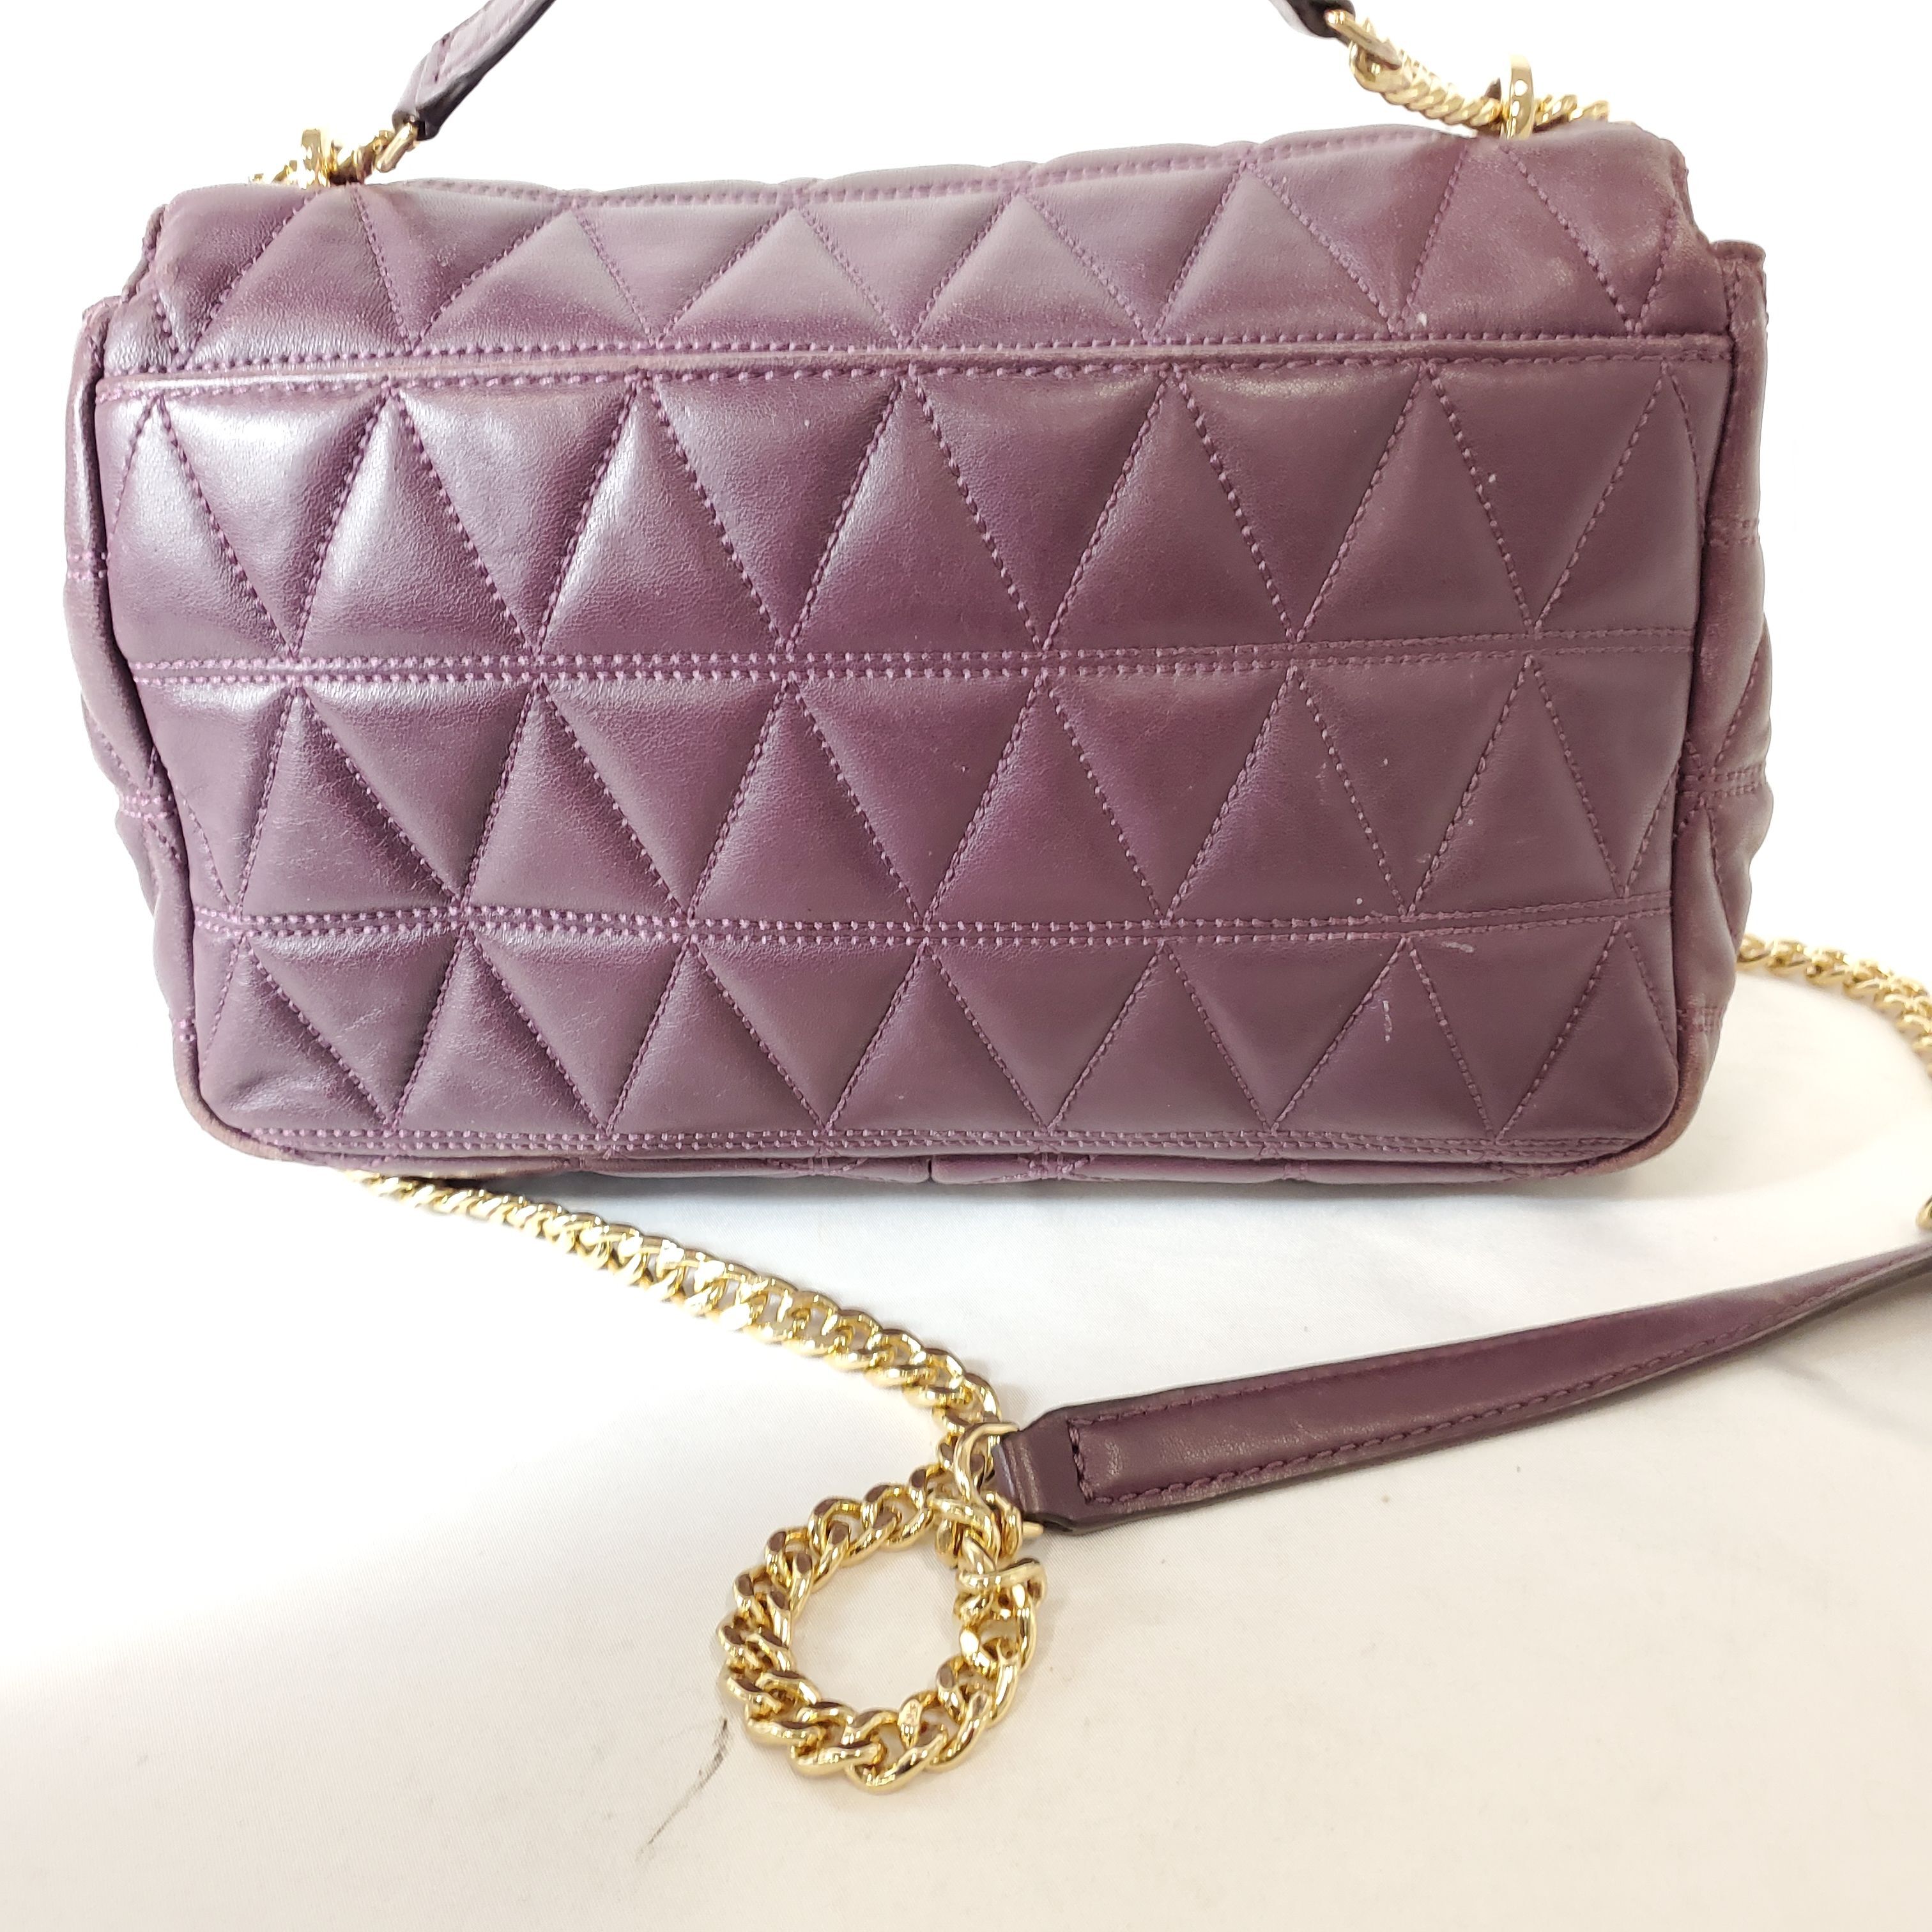 Michael Kors Purple Purse, with Scalloped Designs on front | eBay